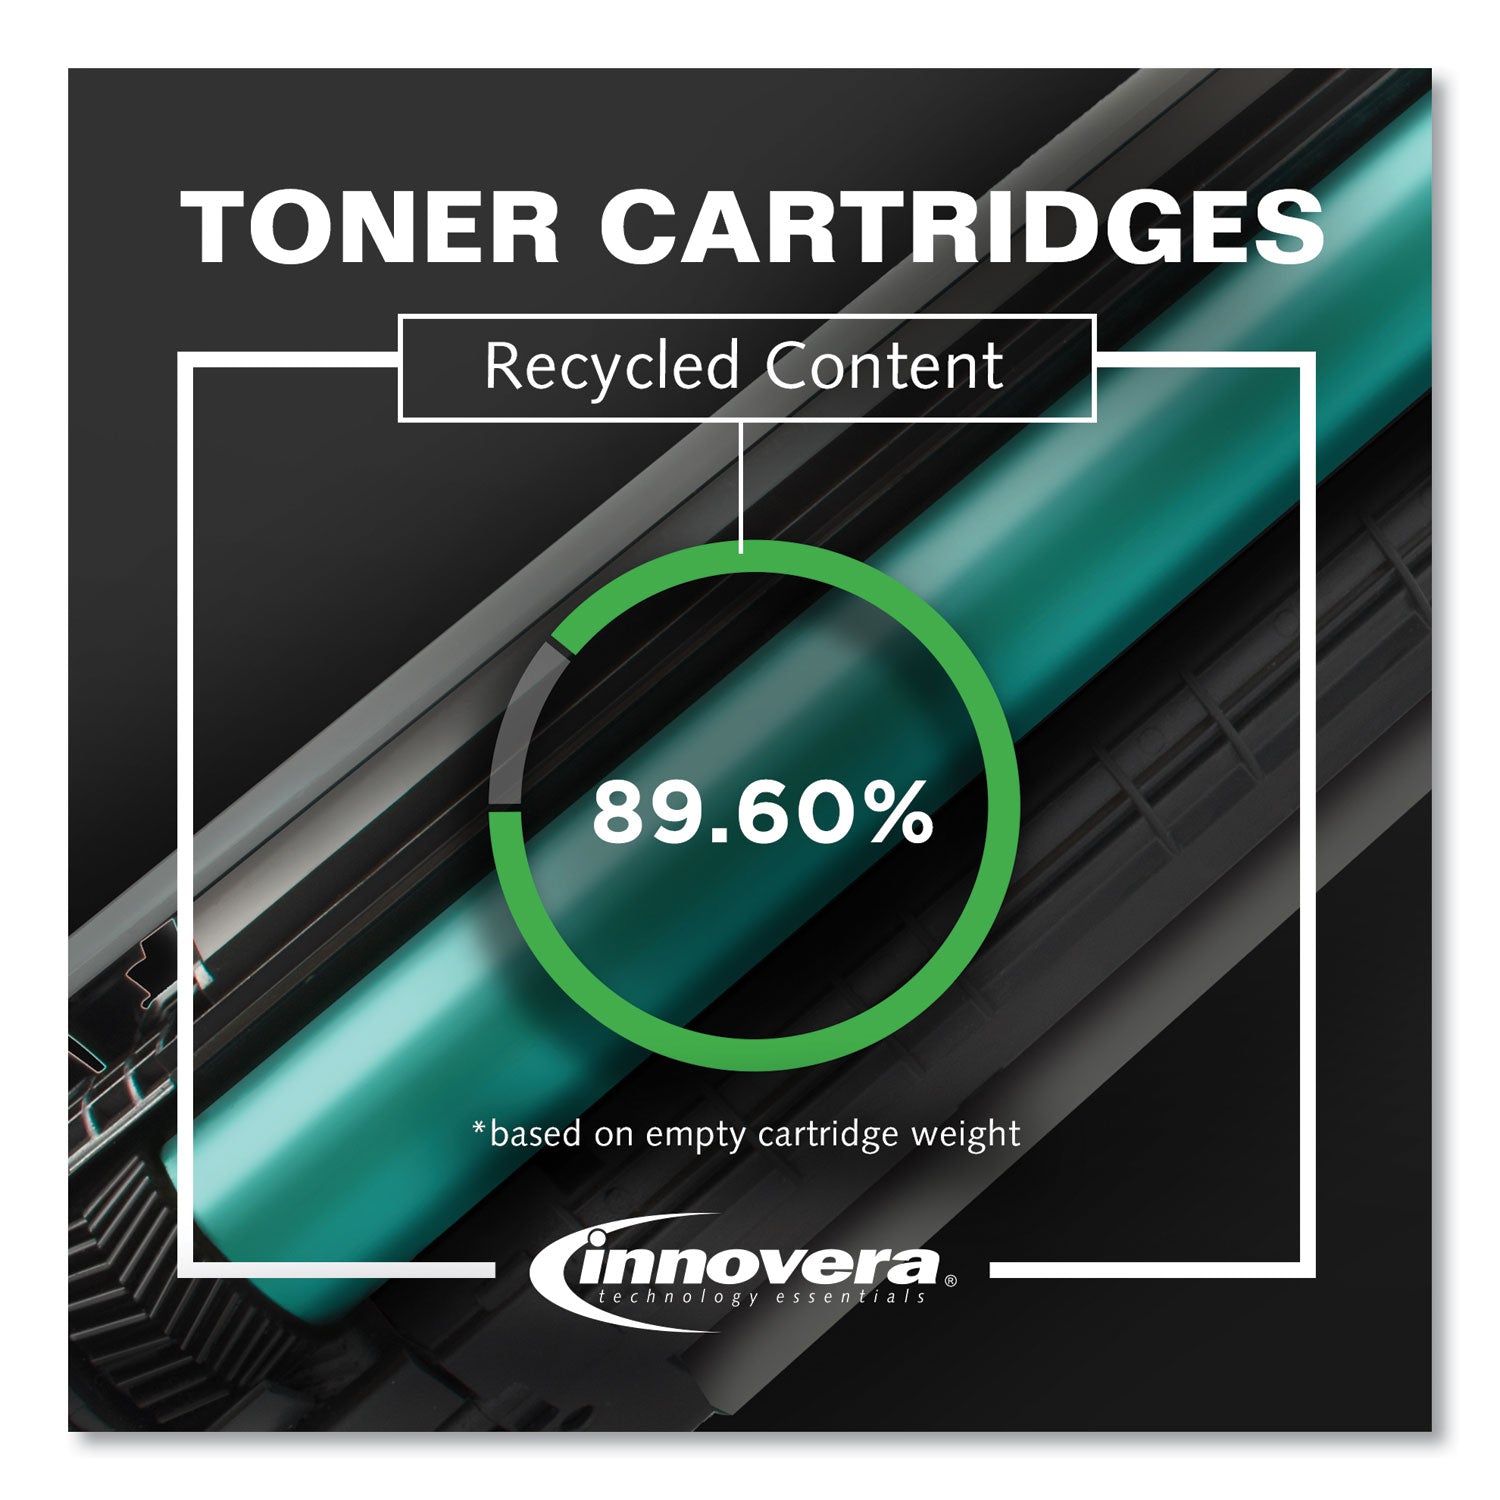 Remanufactured Black Toner, Replacement for 305A (CE410A), 2,200 Page-Yield - 